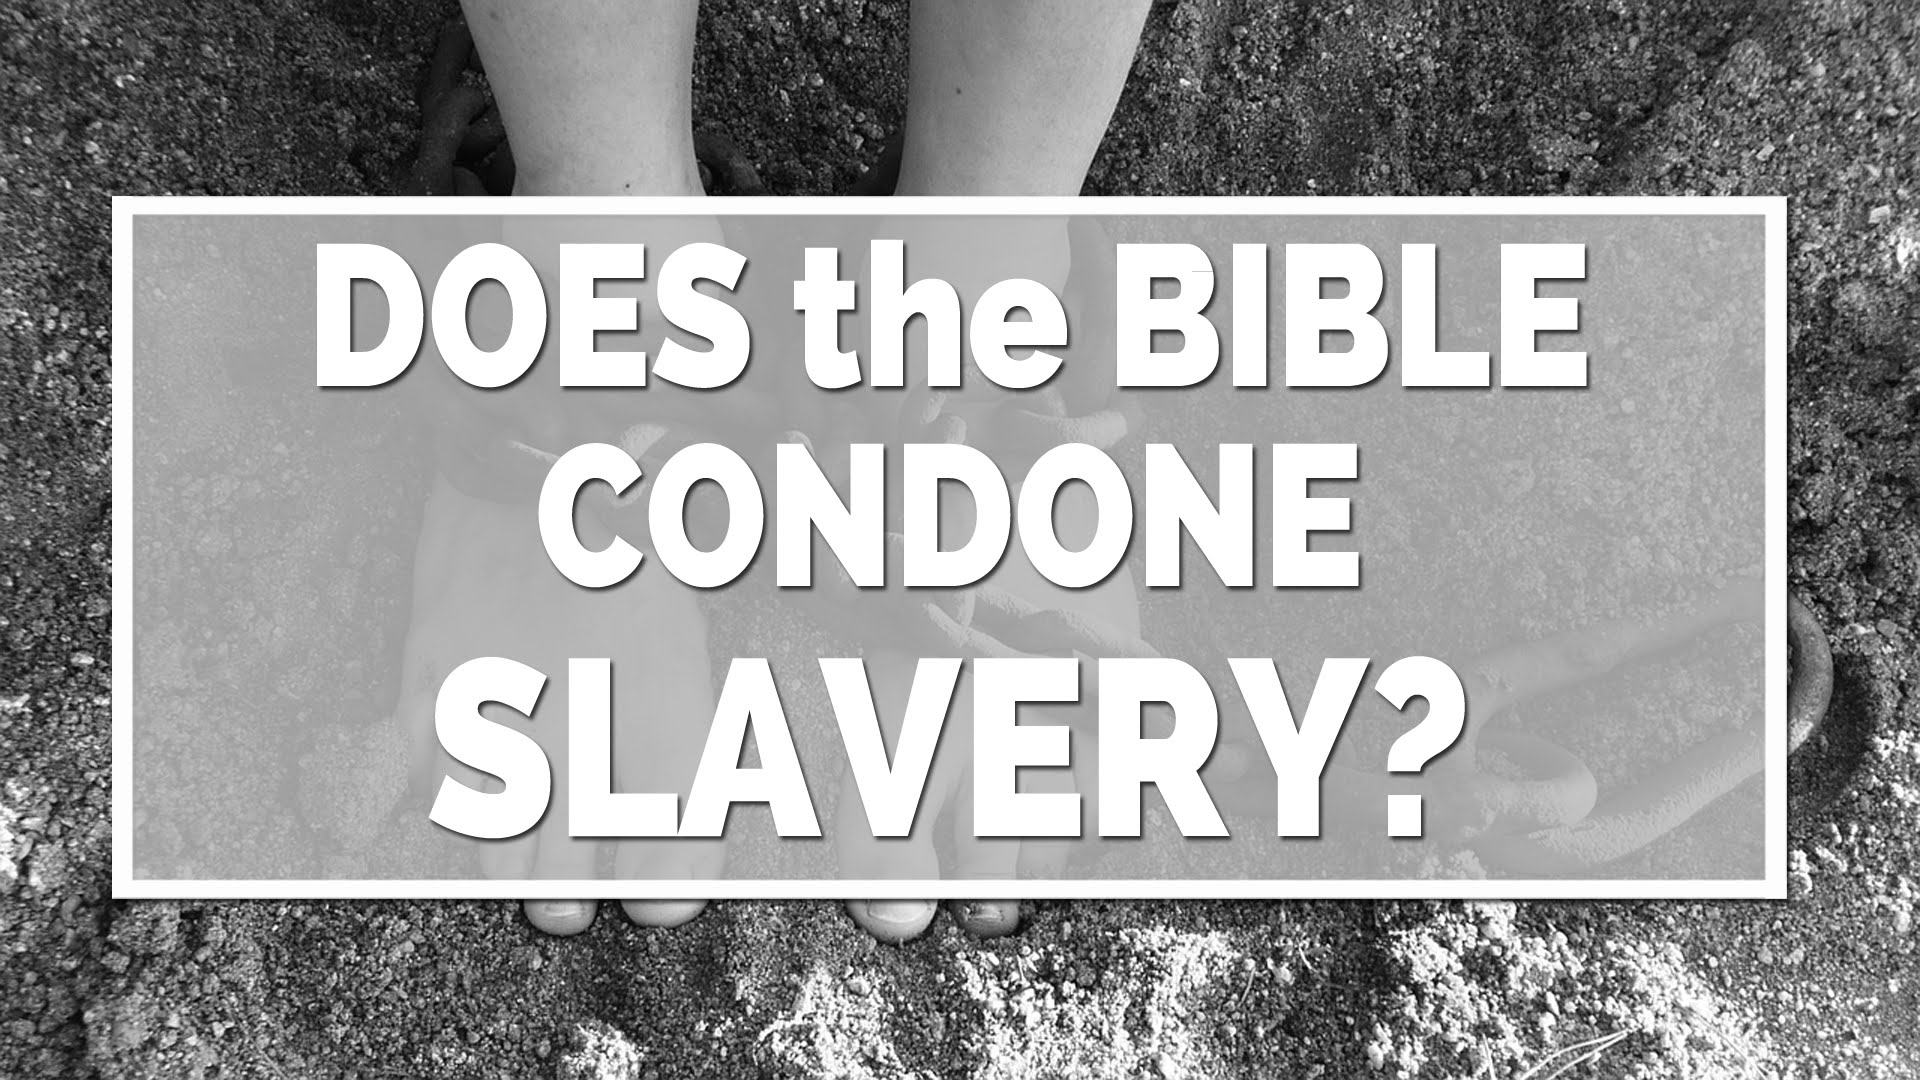 Does the Bible Condone or Condemn Slavery?